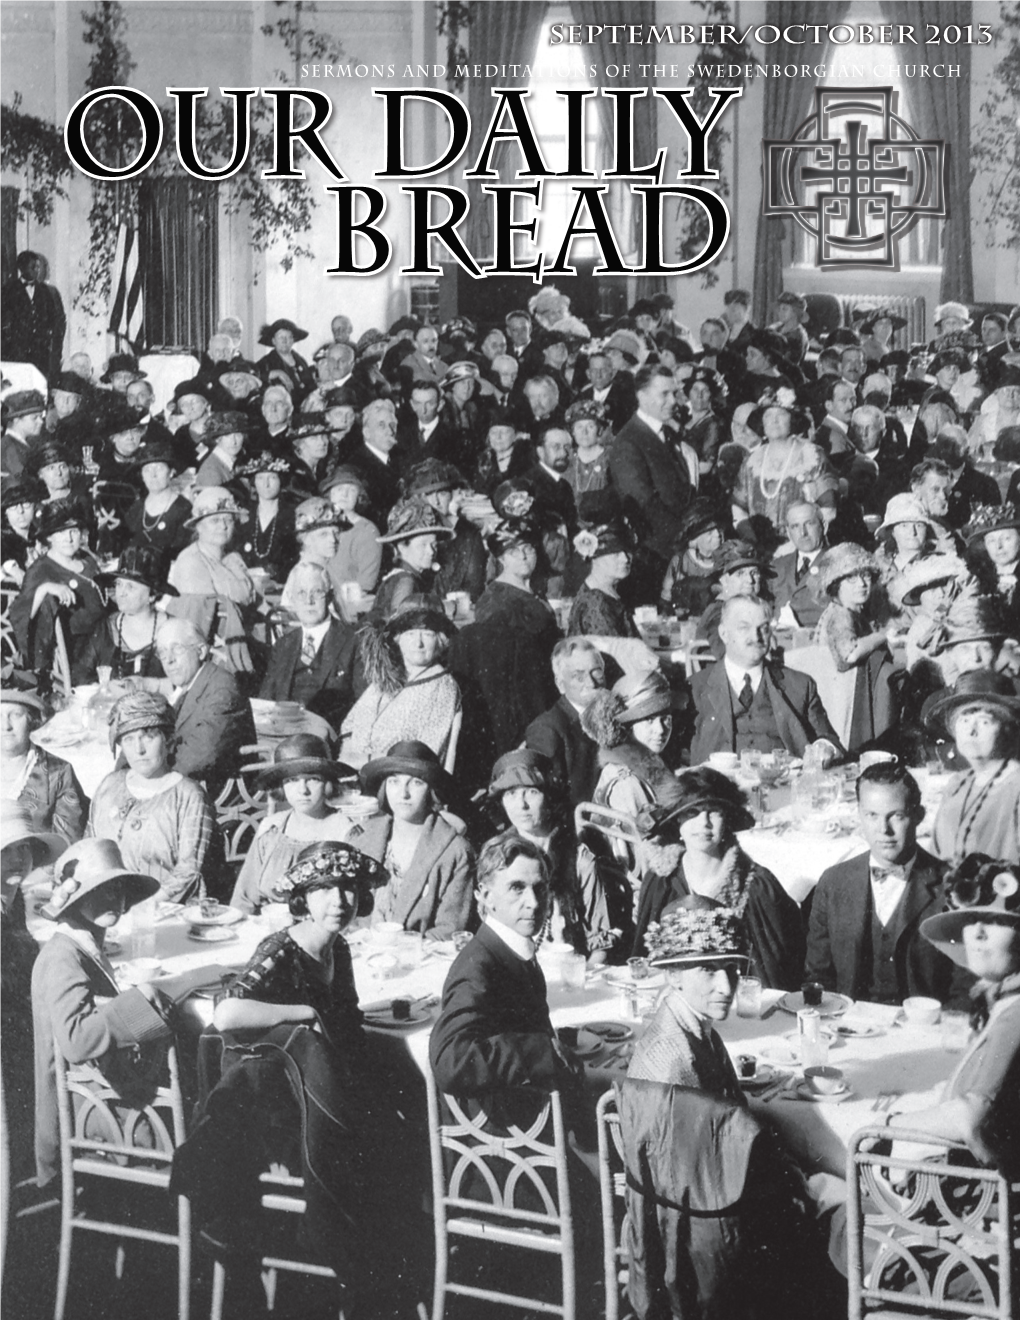 Our Daily Bread Dear Reader, Prayer We Hope This Issue’S Arrival Finds You Healthy in Body and Soul, and That the Unfolding Season Is Rife with Blessings